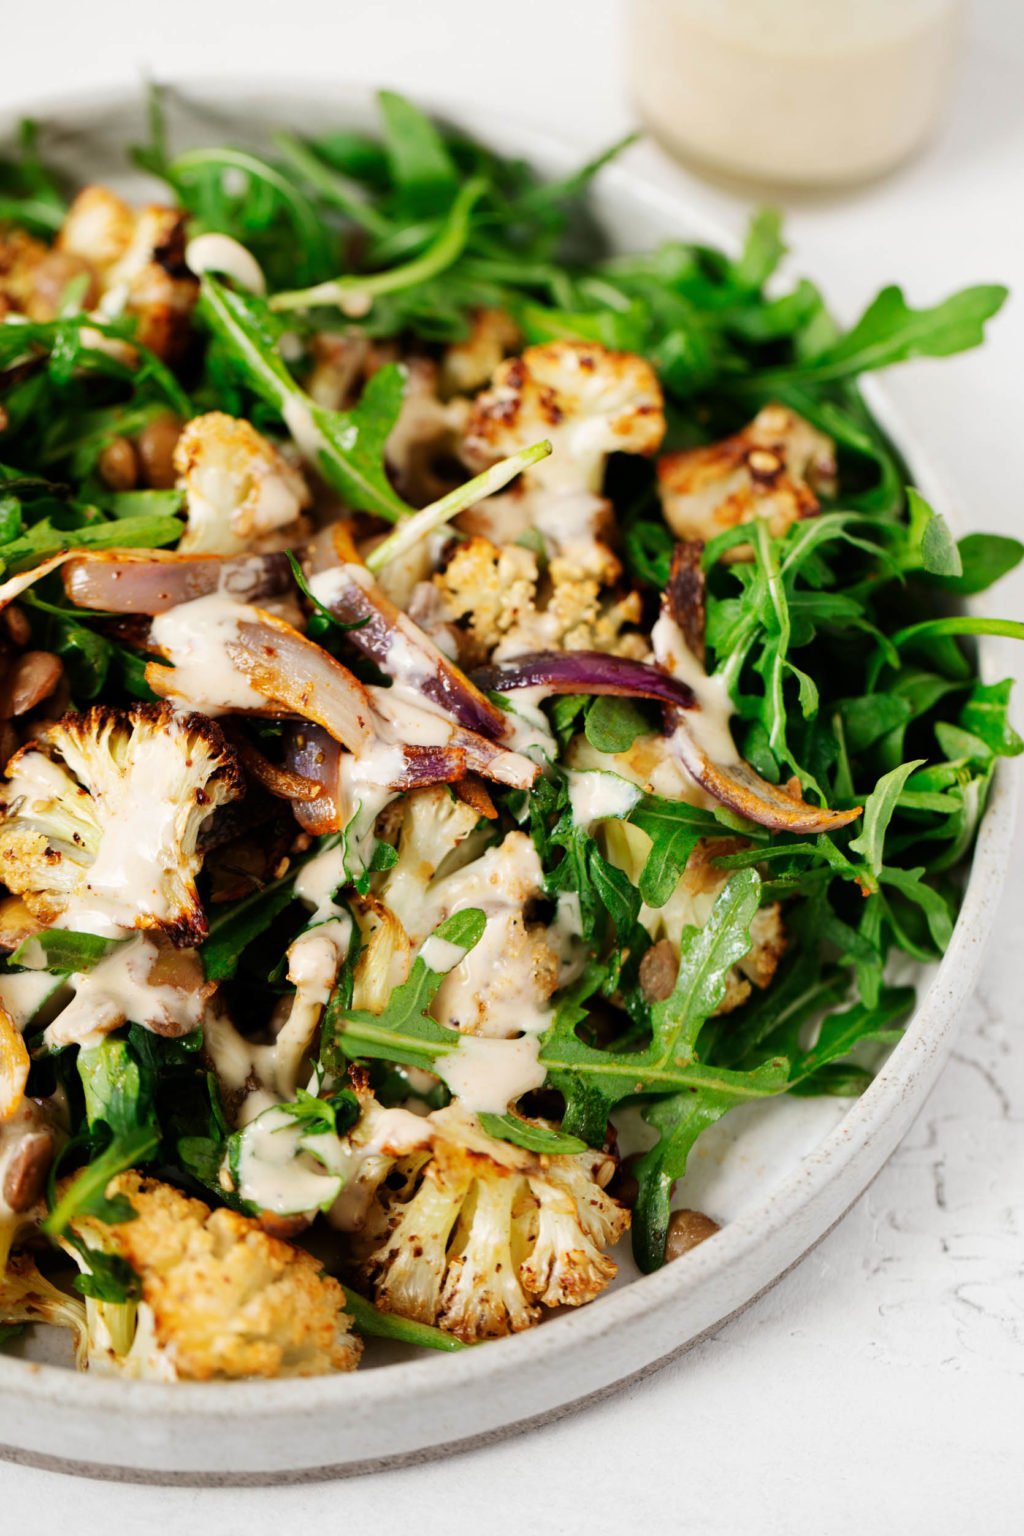 A white plate has been covered with a vibrant salad of za'atar roasted cauliflower, red onion, lentils and greens.